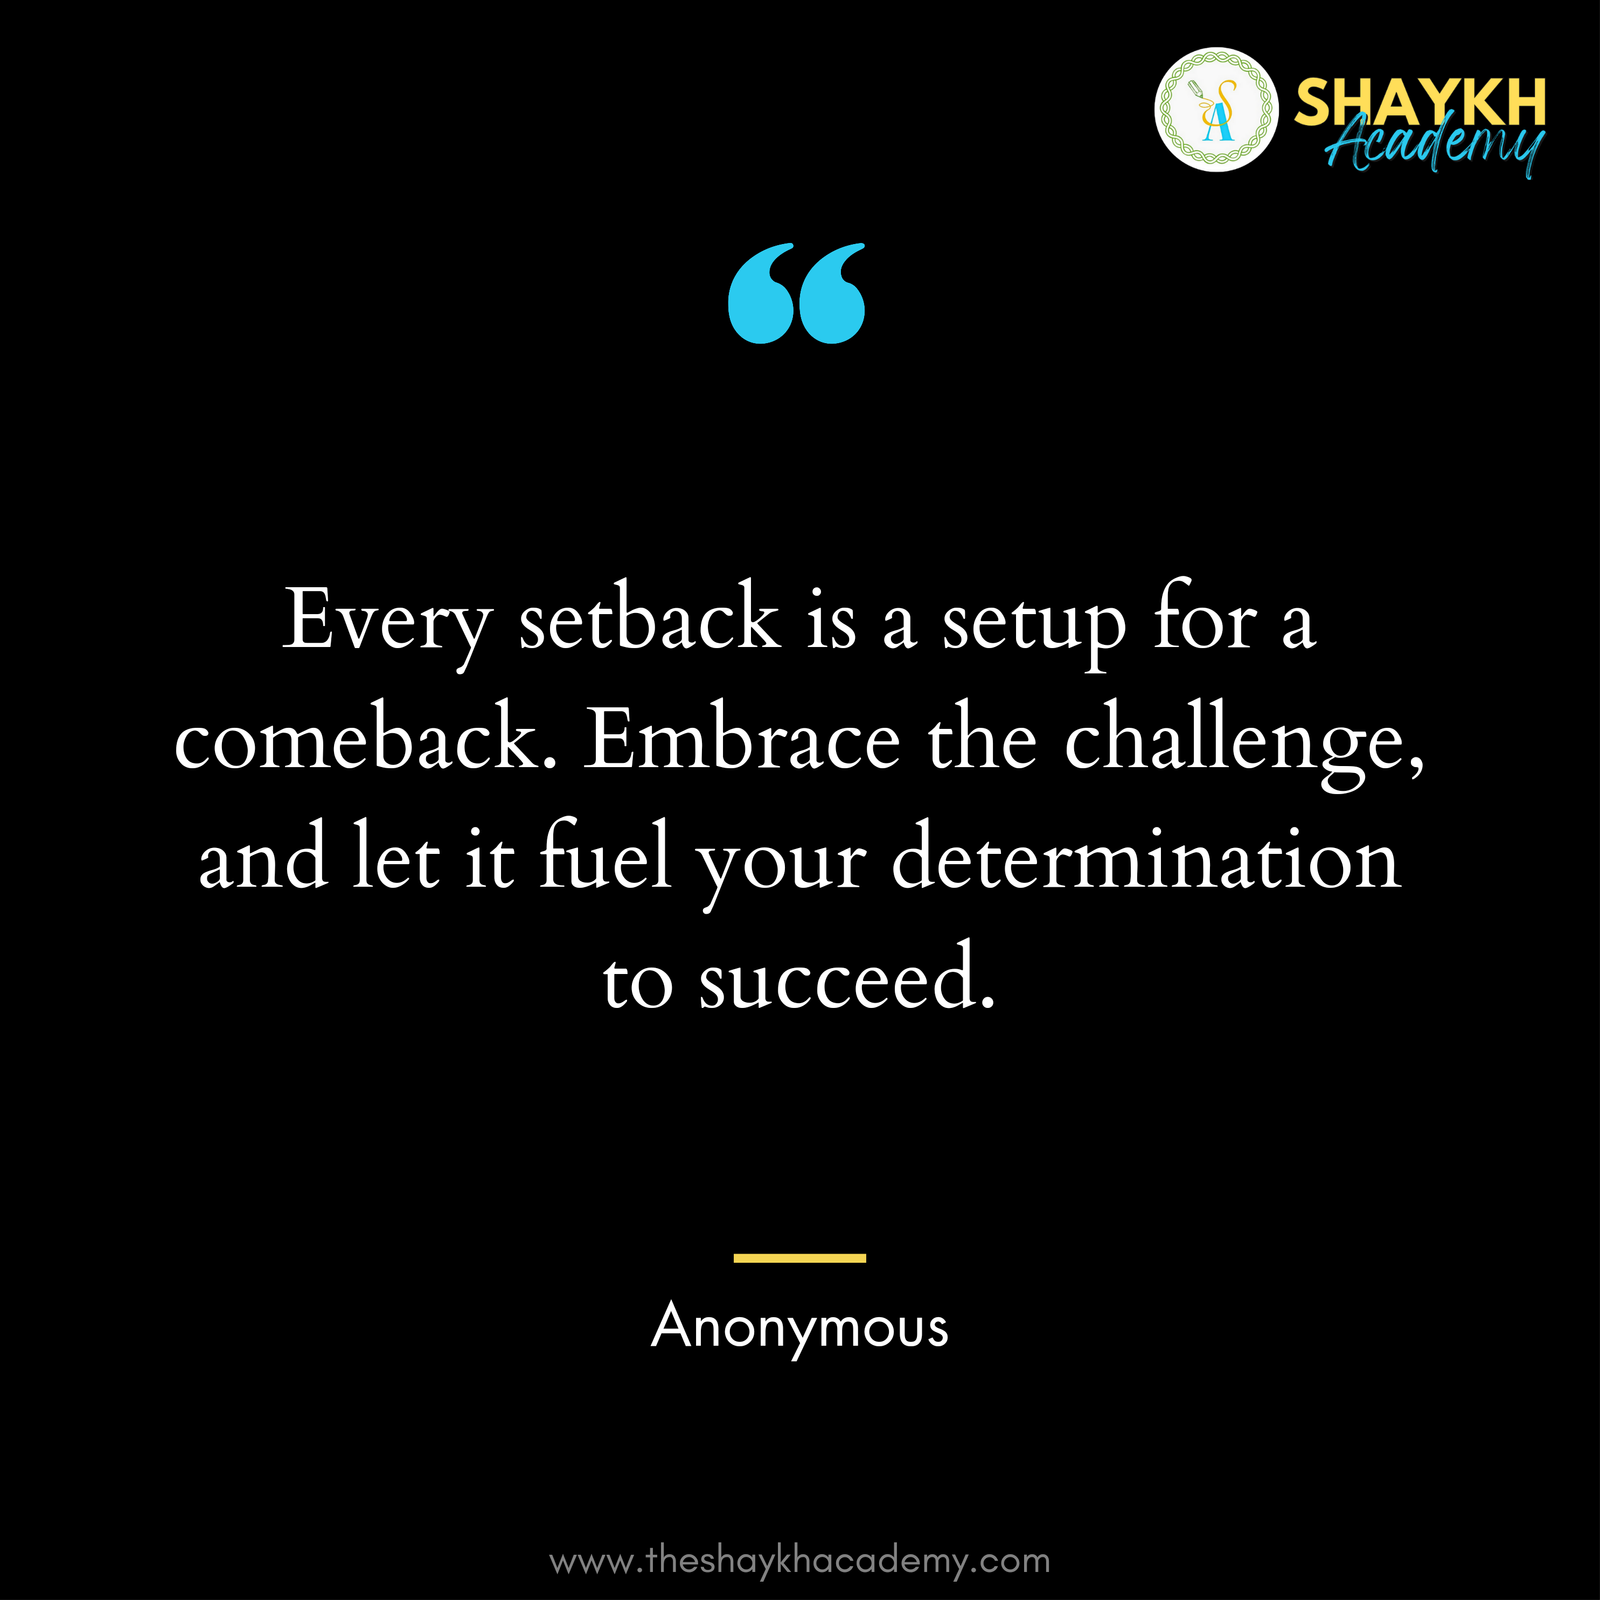 Every setback is a setup for a comeback. Embrace the challenge, and let it fuel your determination to succeed.